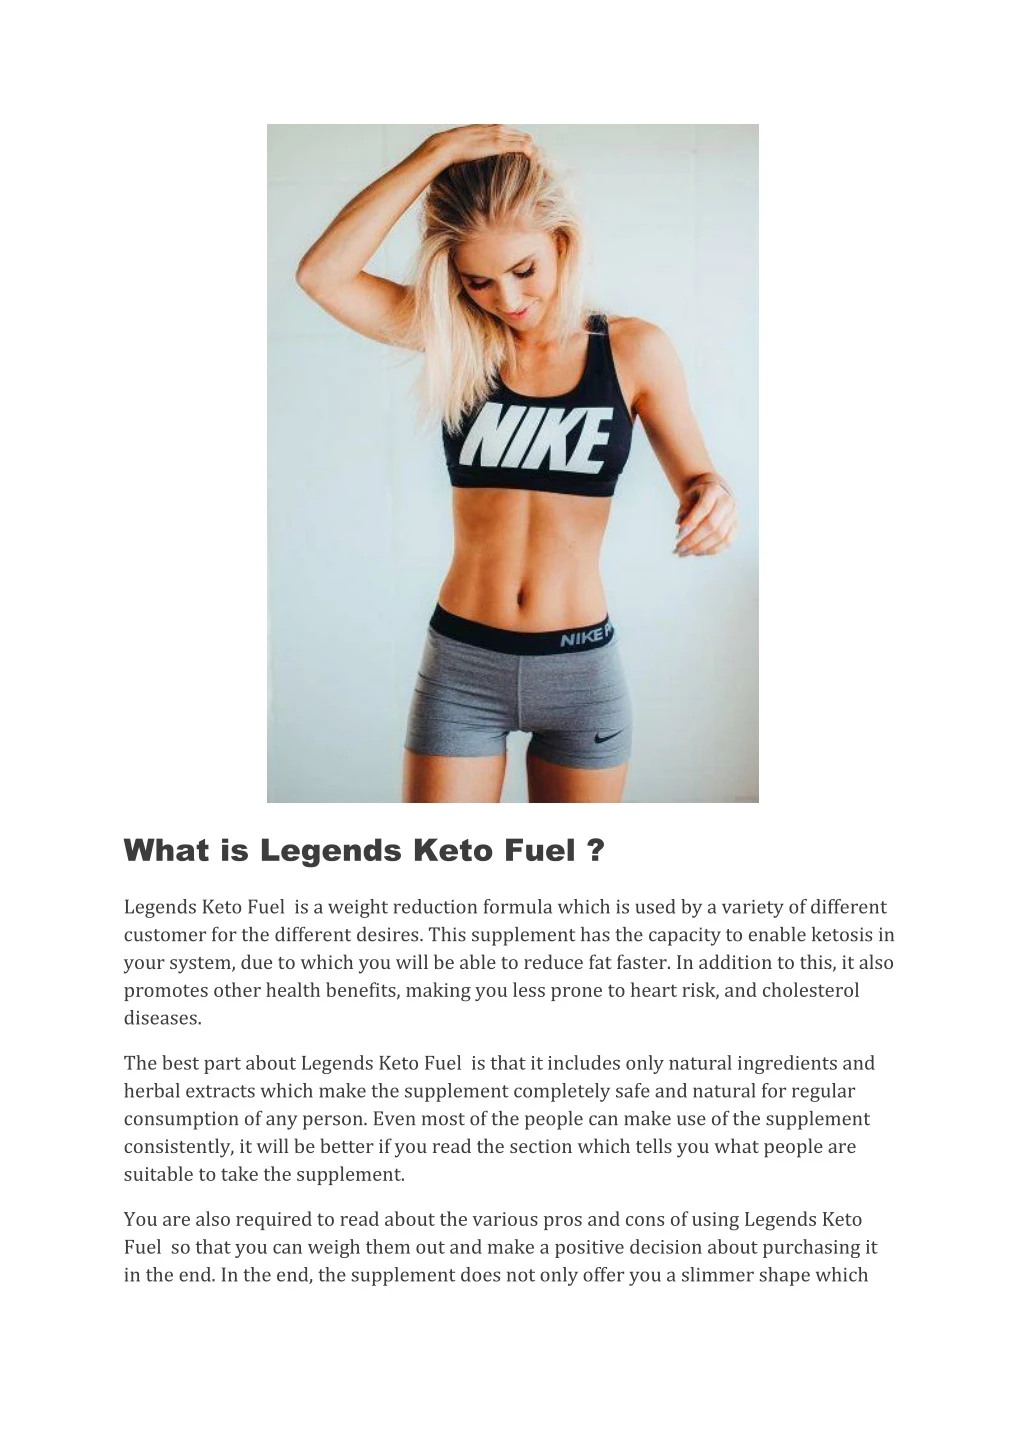 what is legends keto fuel